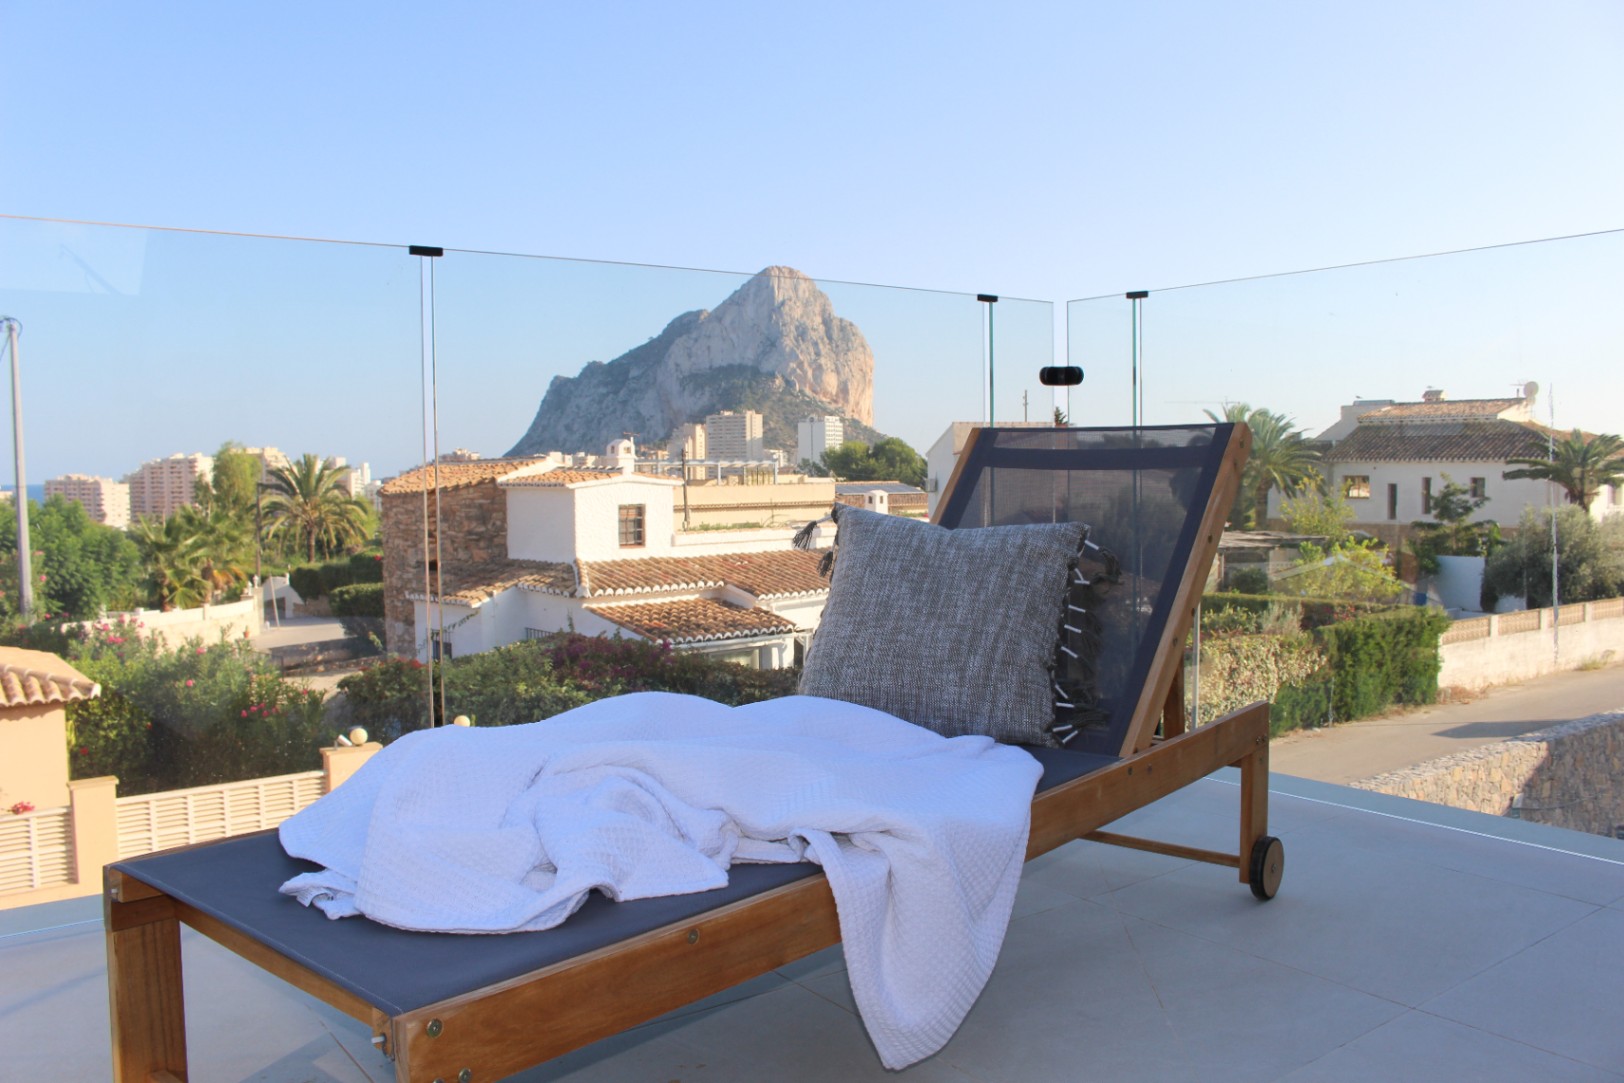 TERRACED HOUSES IN THE BEST LOCATION TO ACCESS THE BEACH OF CALPE ON FOOT AND WITH UNOBSTRUCTED VIEWS